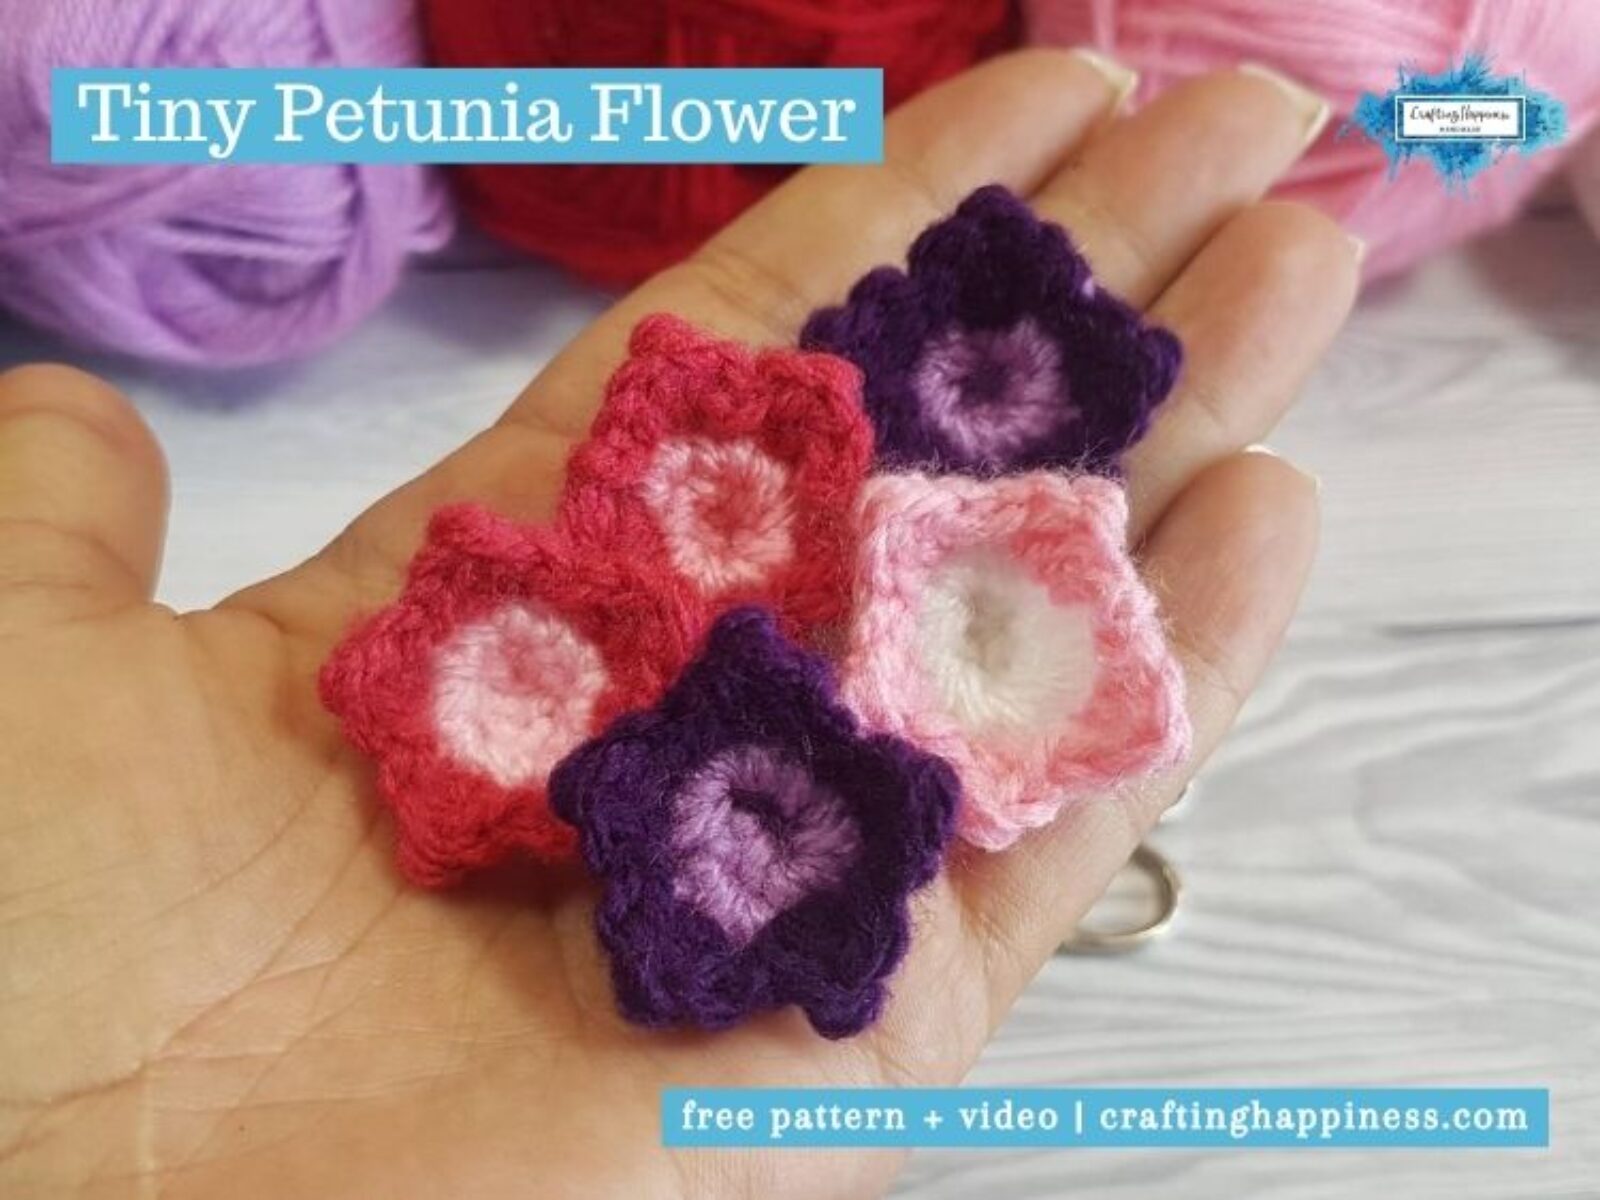 Crochet Petunia Tiny Flower by Crafting Happiness FACEBOOK POSTER